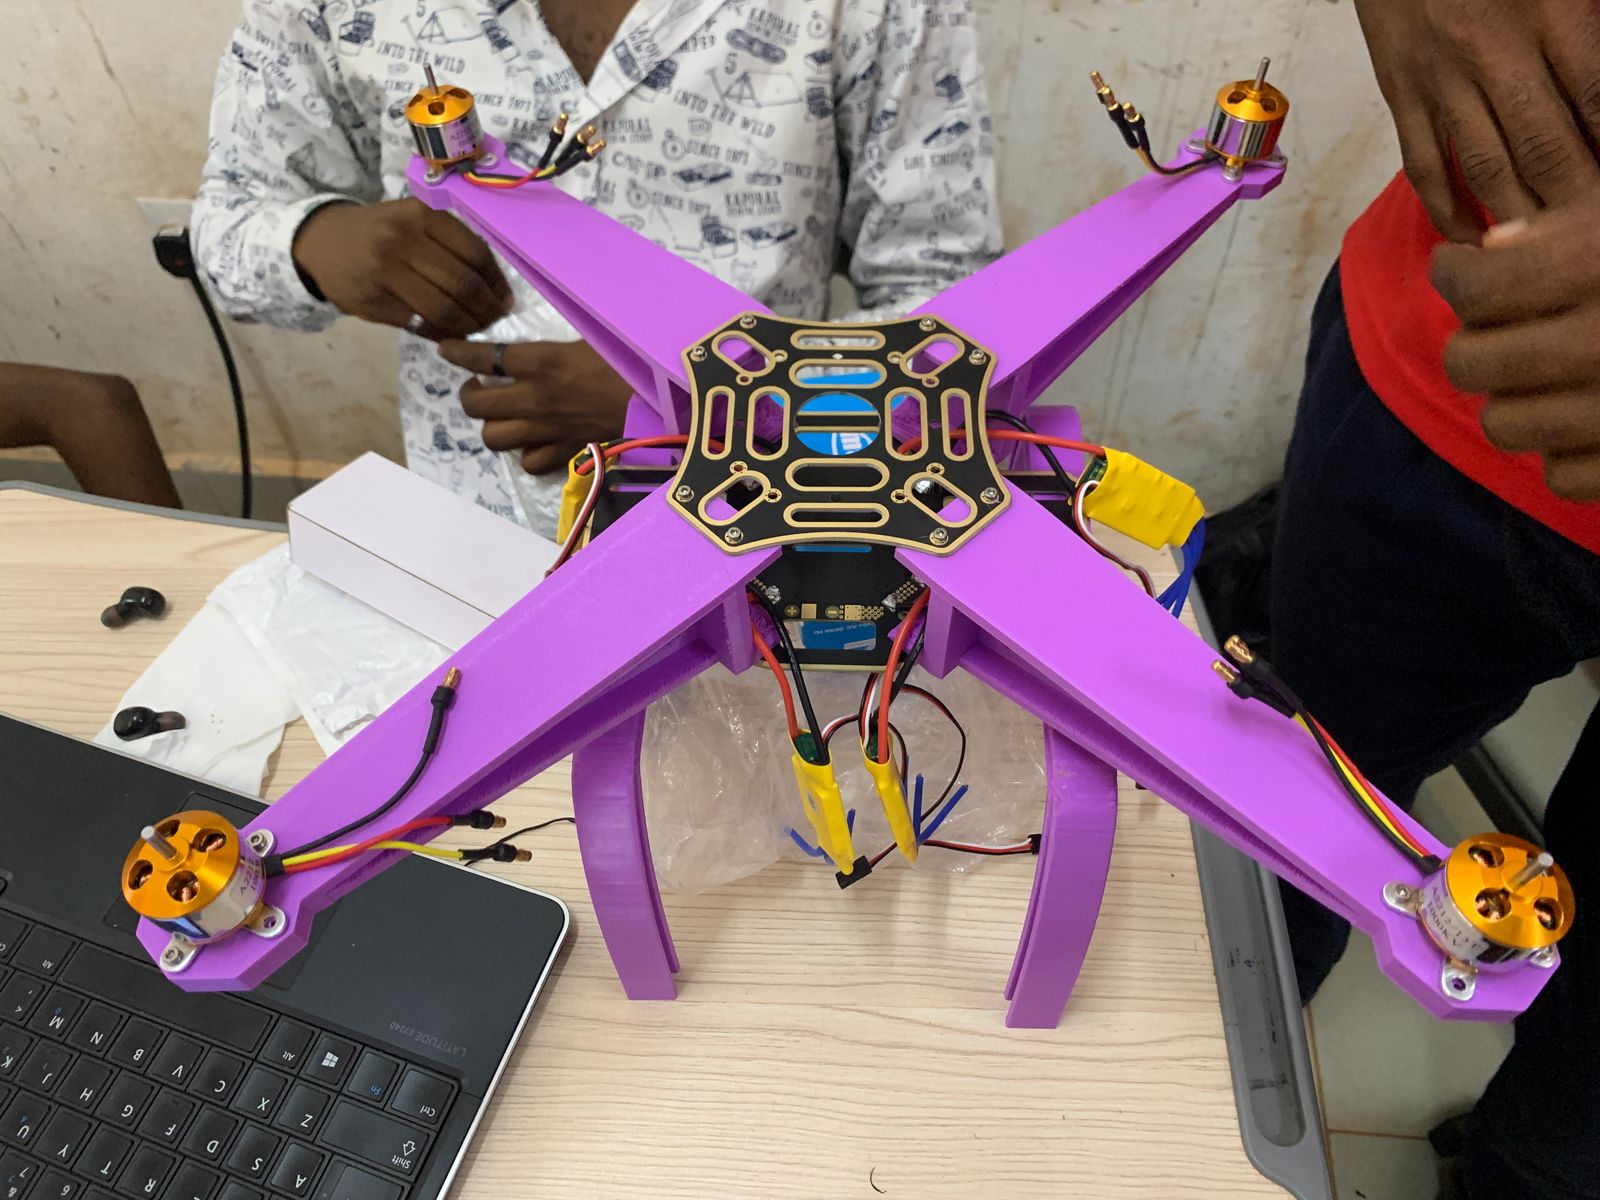 A drone that was designed and 3D printed in the school's Lab